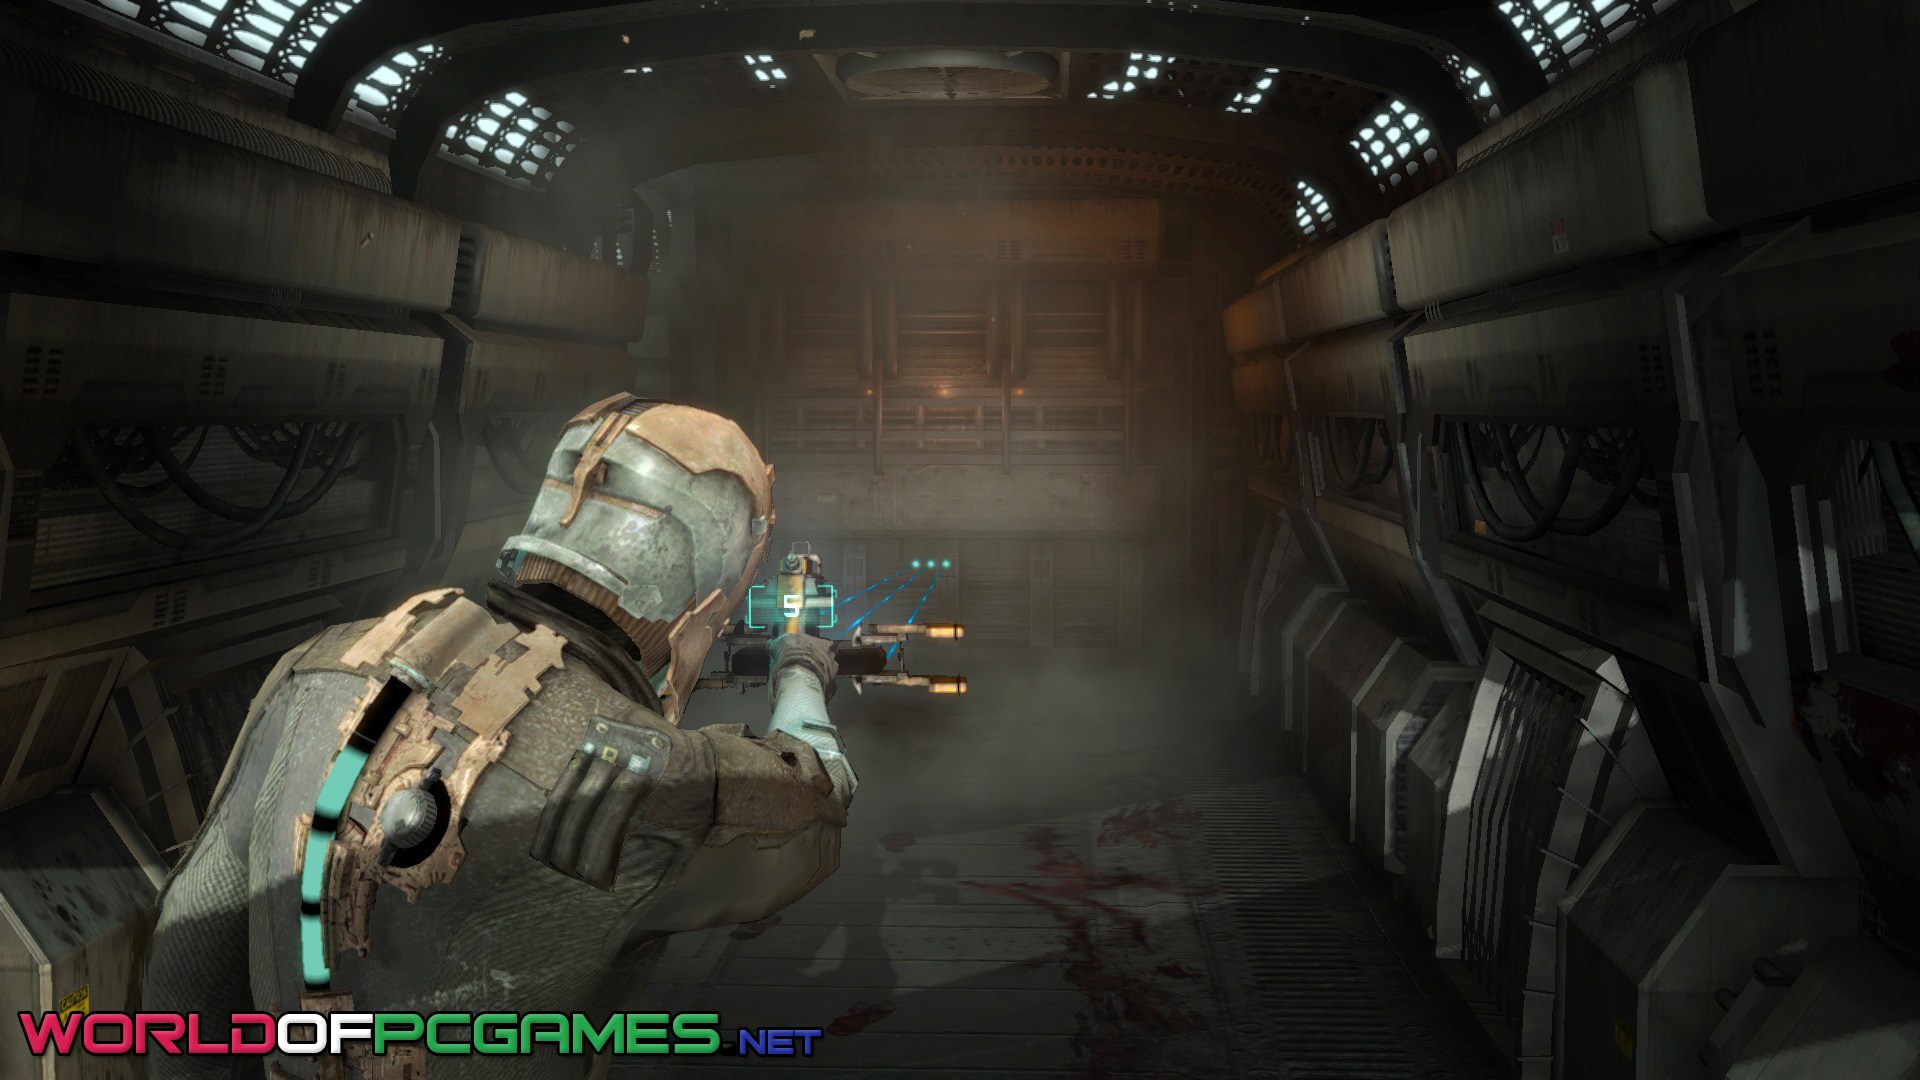 dead space 1 Free Download By worldof-pcgames.net